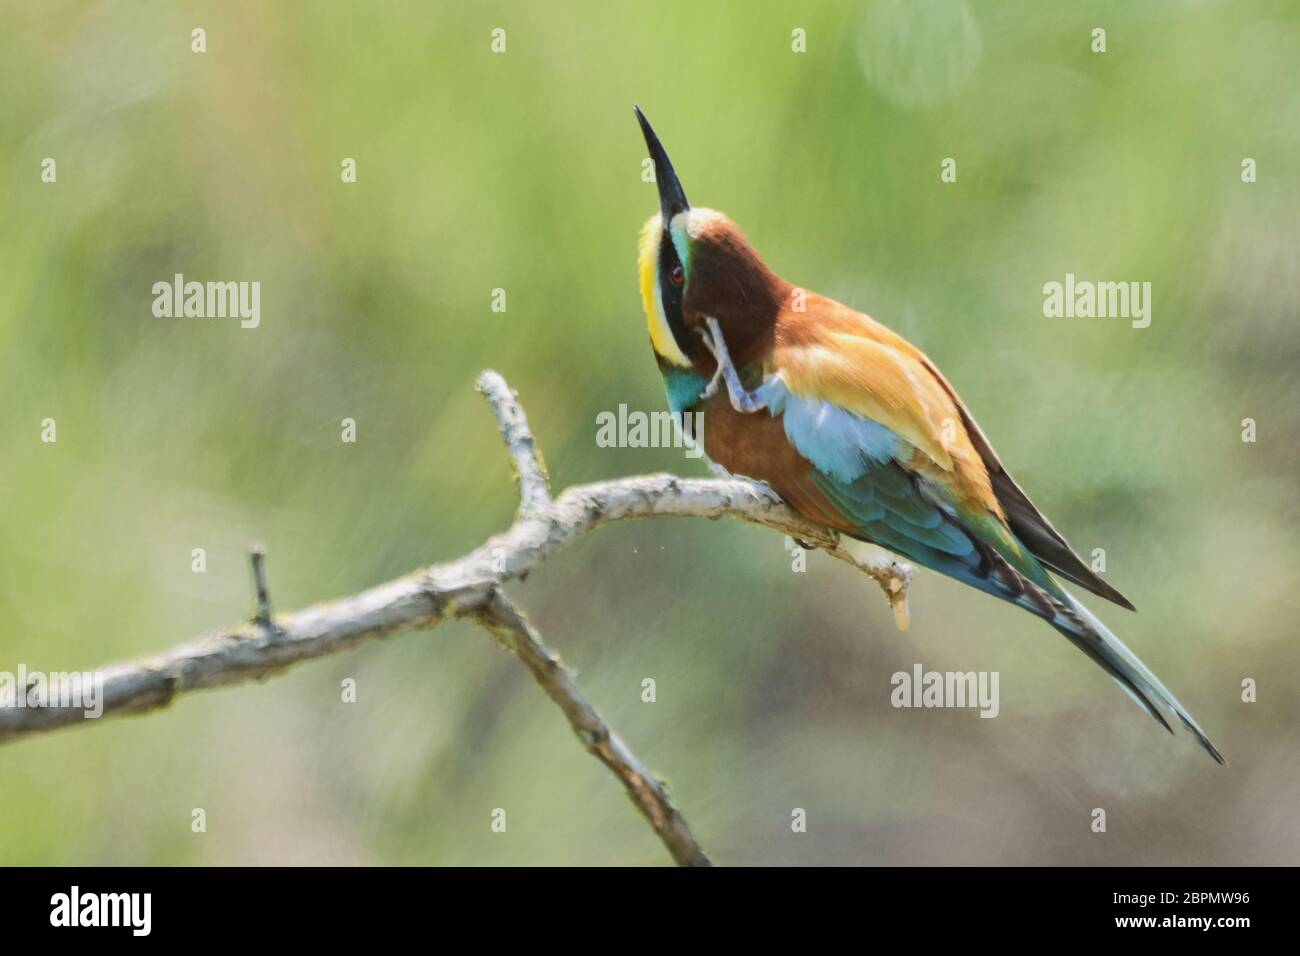 European bee-eater bird (Merops apiaster) preening plumage and scratching head on branch Stock Photo